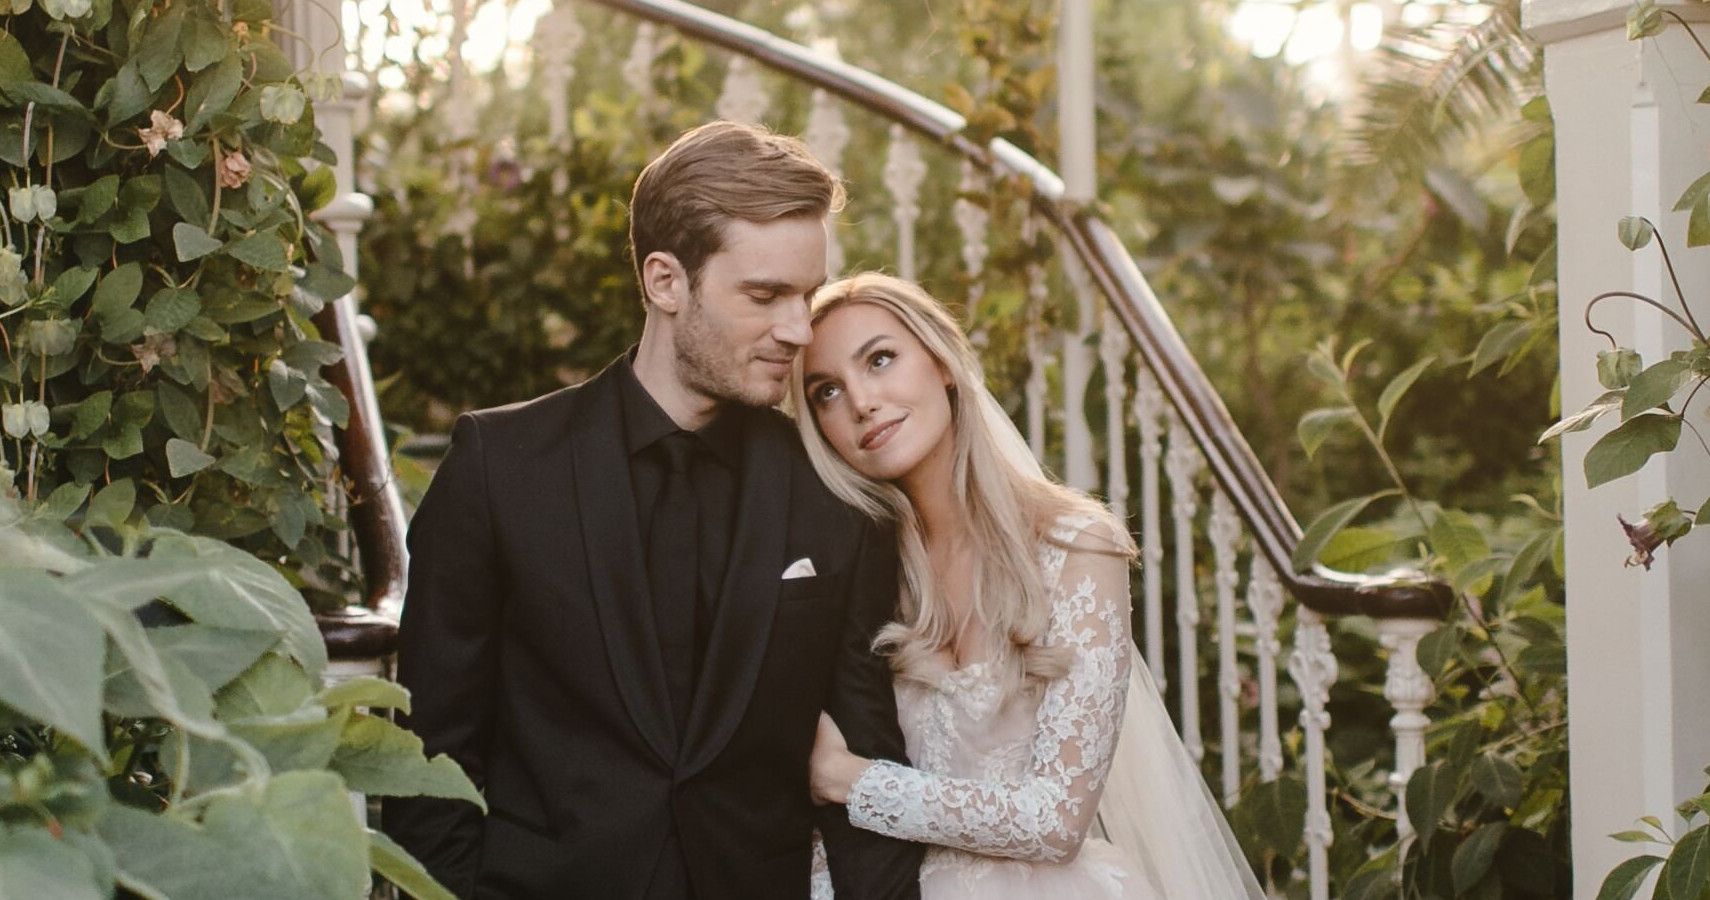 Youtube Stars Pewdiepie And Marzia Have Finally Gotten Married 8702